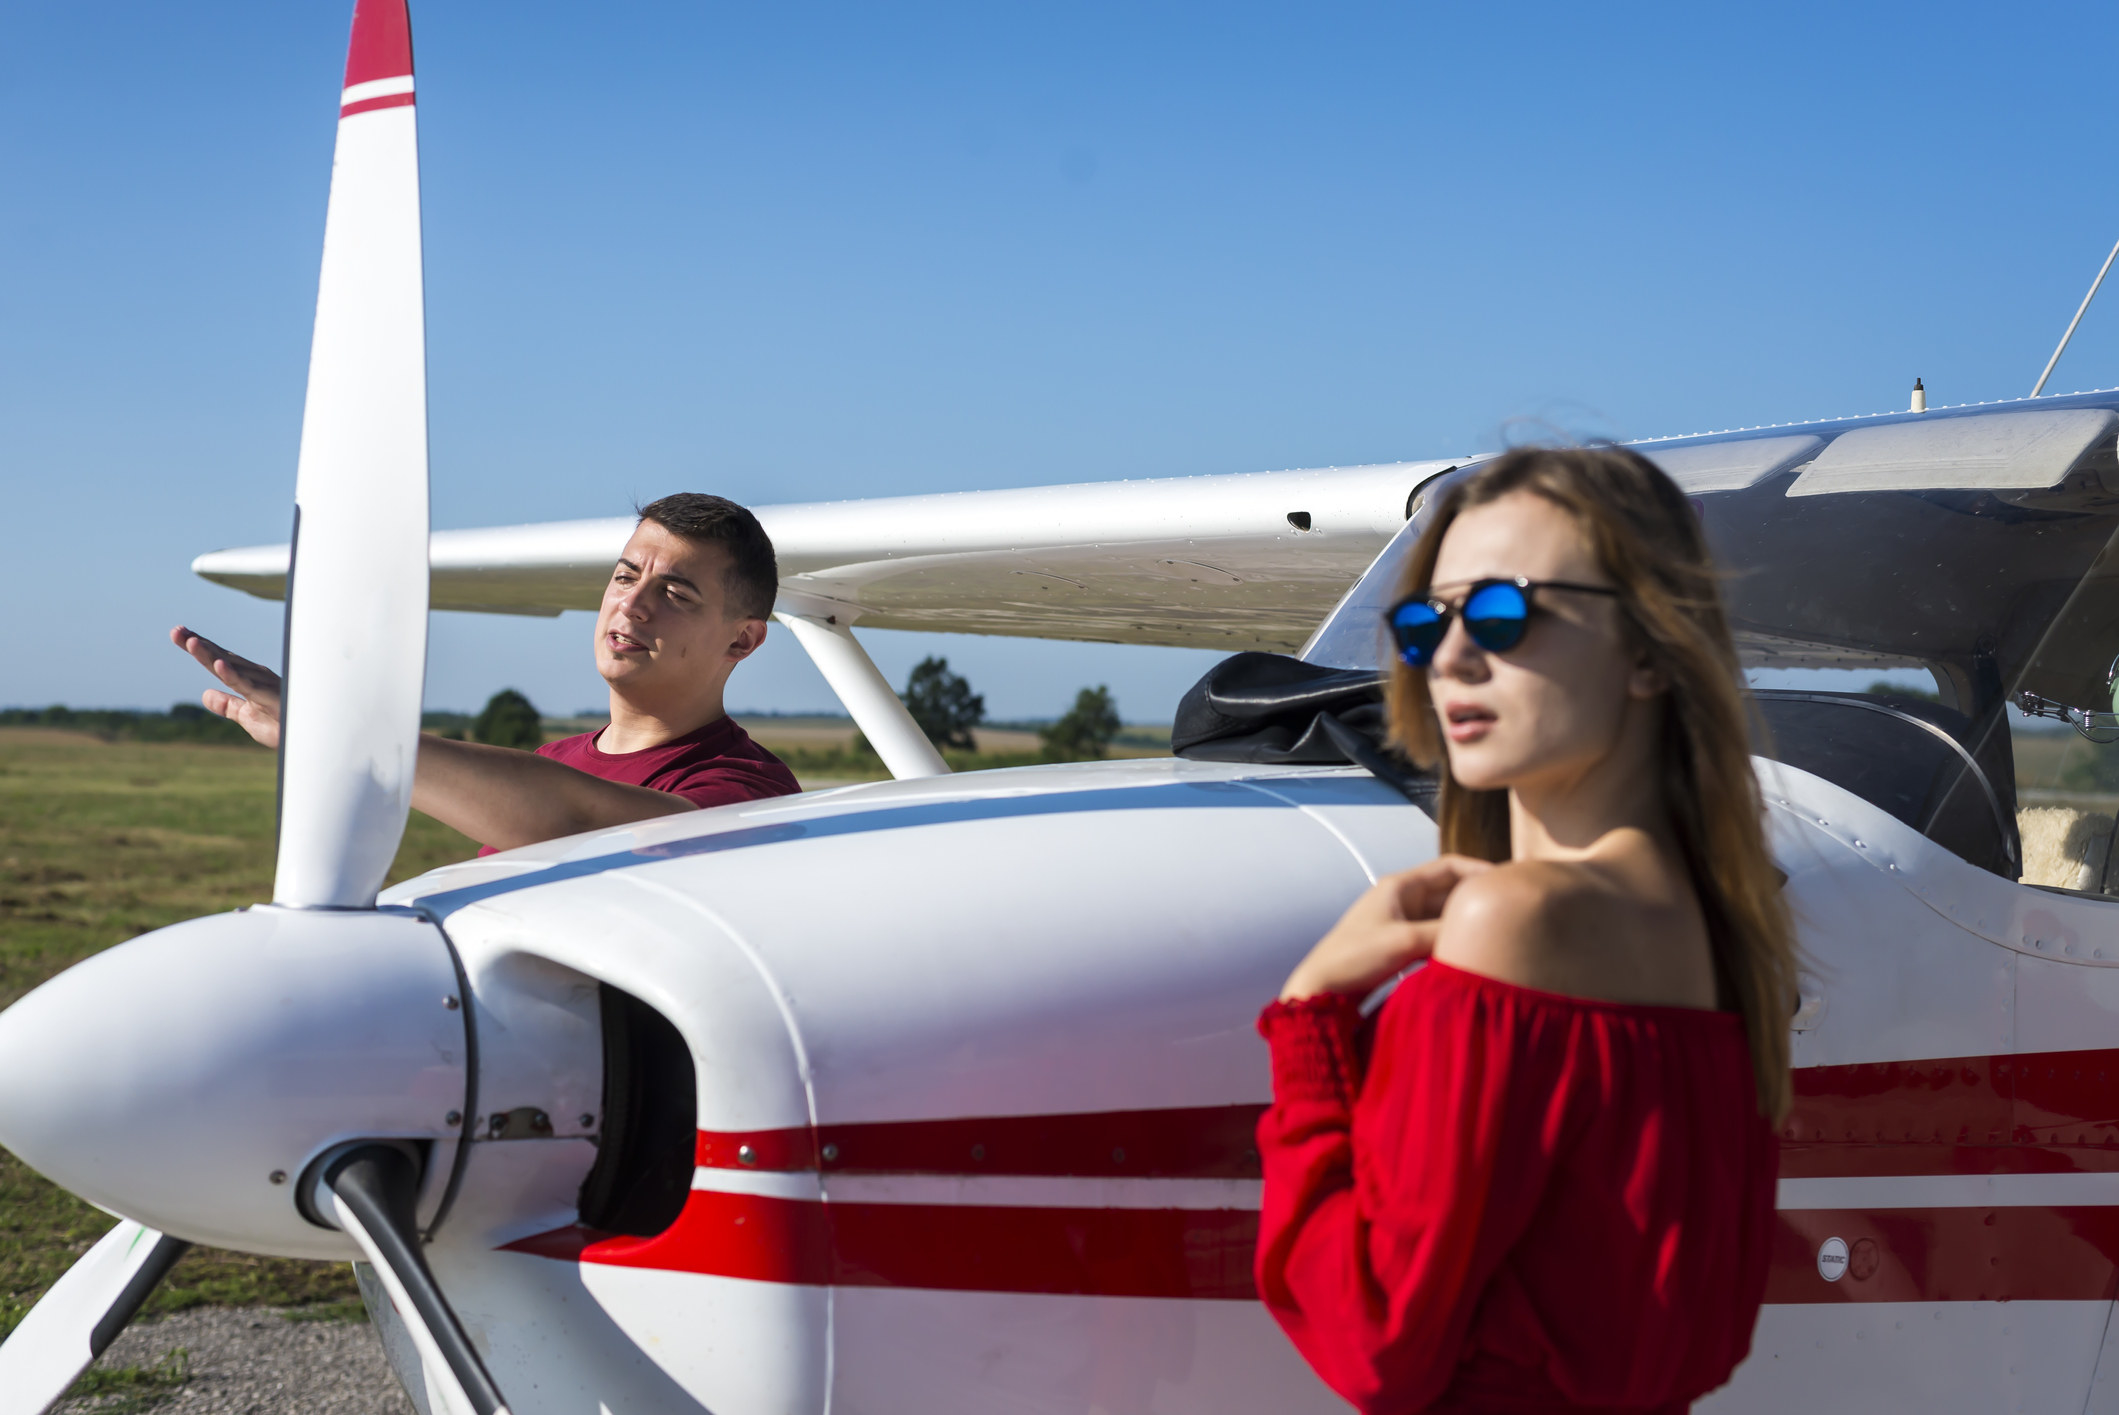 Two young people standing next to a small plane